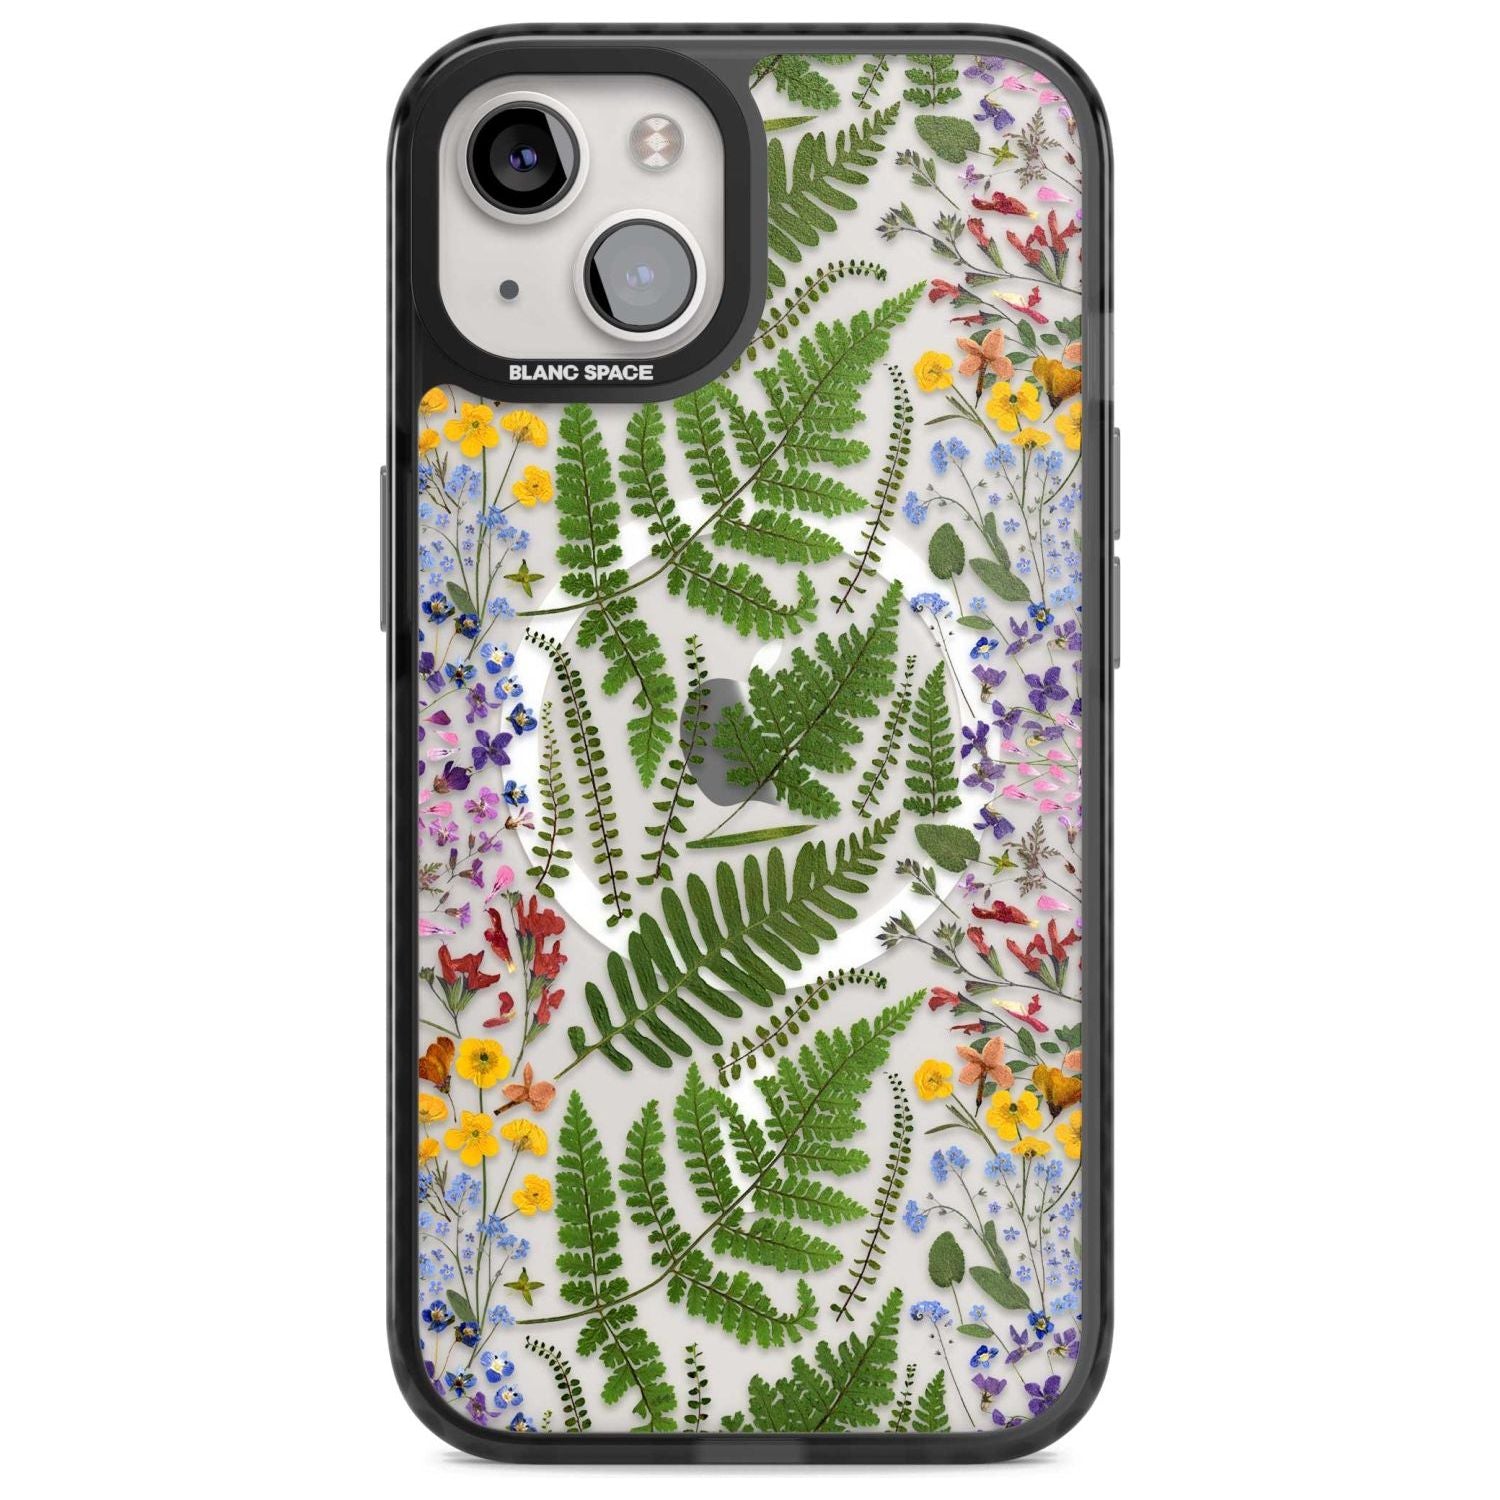 Busy Floral and Fern Design Phone Case iPhone 15 Plus / Magsafe Black Impact Case,iPhone 15 / Magsafe Black Impact Case,iPhone 14 Plus / Magsafe Black Impact Case,iPhone 14 / Magsafe Black Impact Case,iPhone 13 / Magsafe Black Impact Case Blanc Space